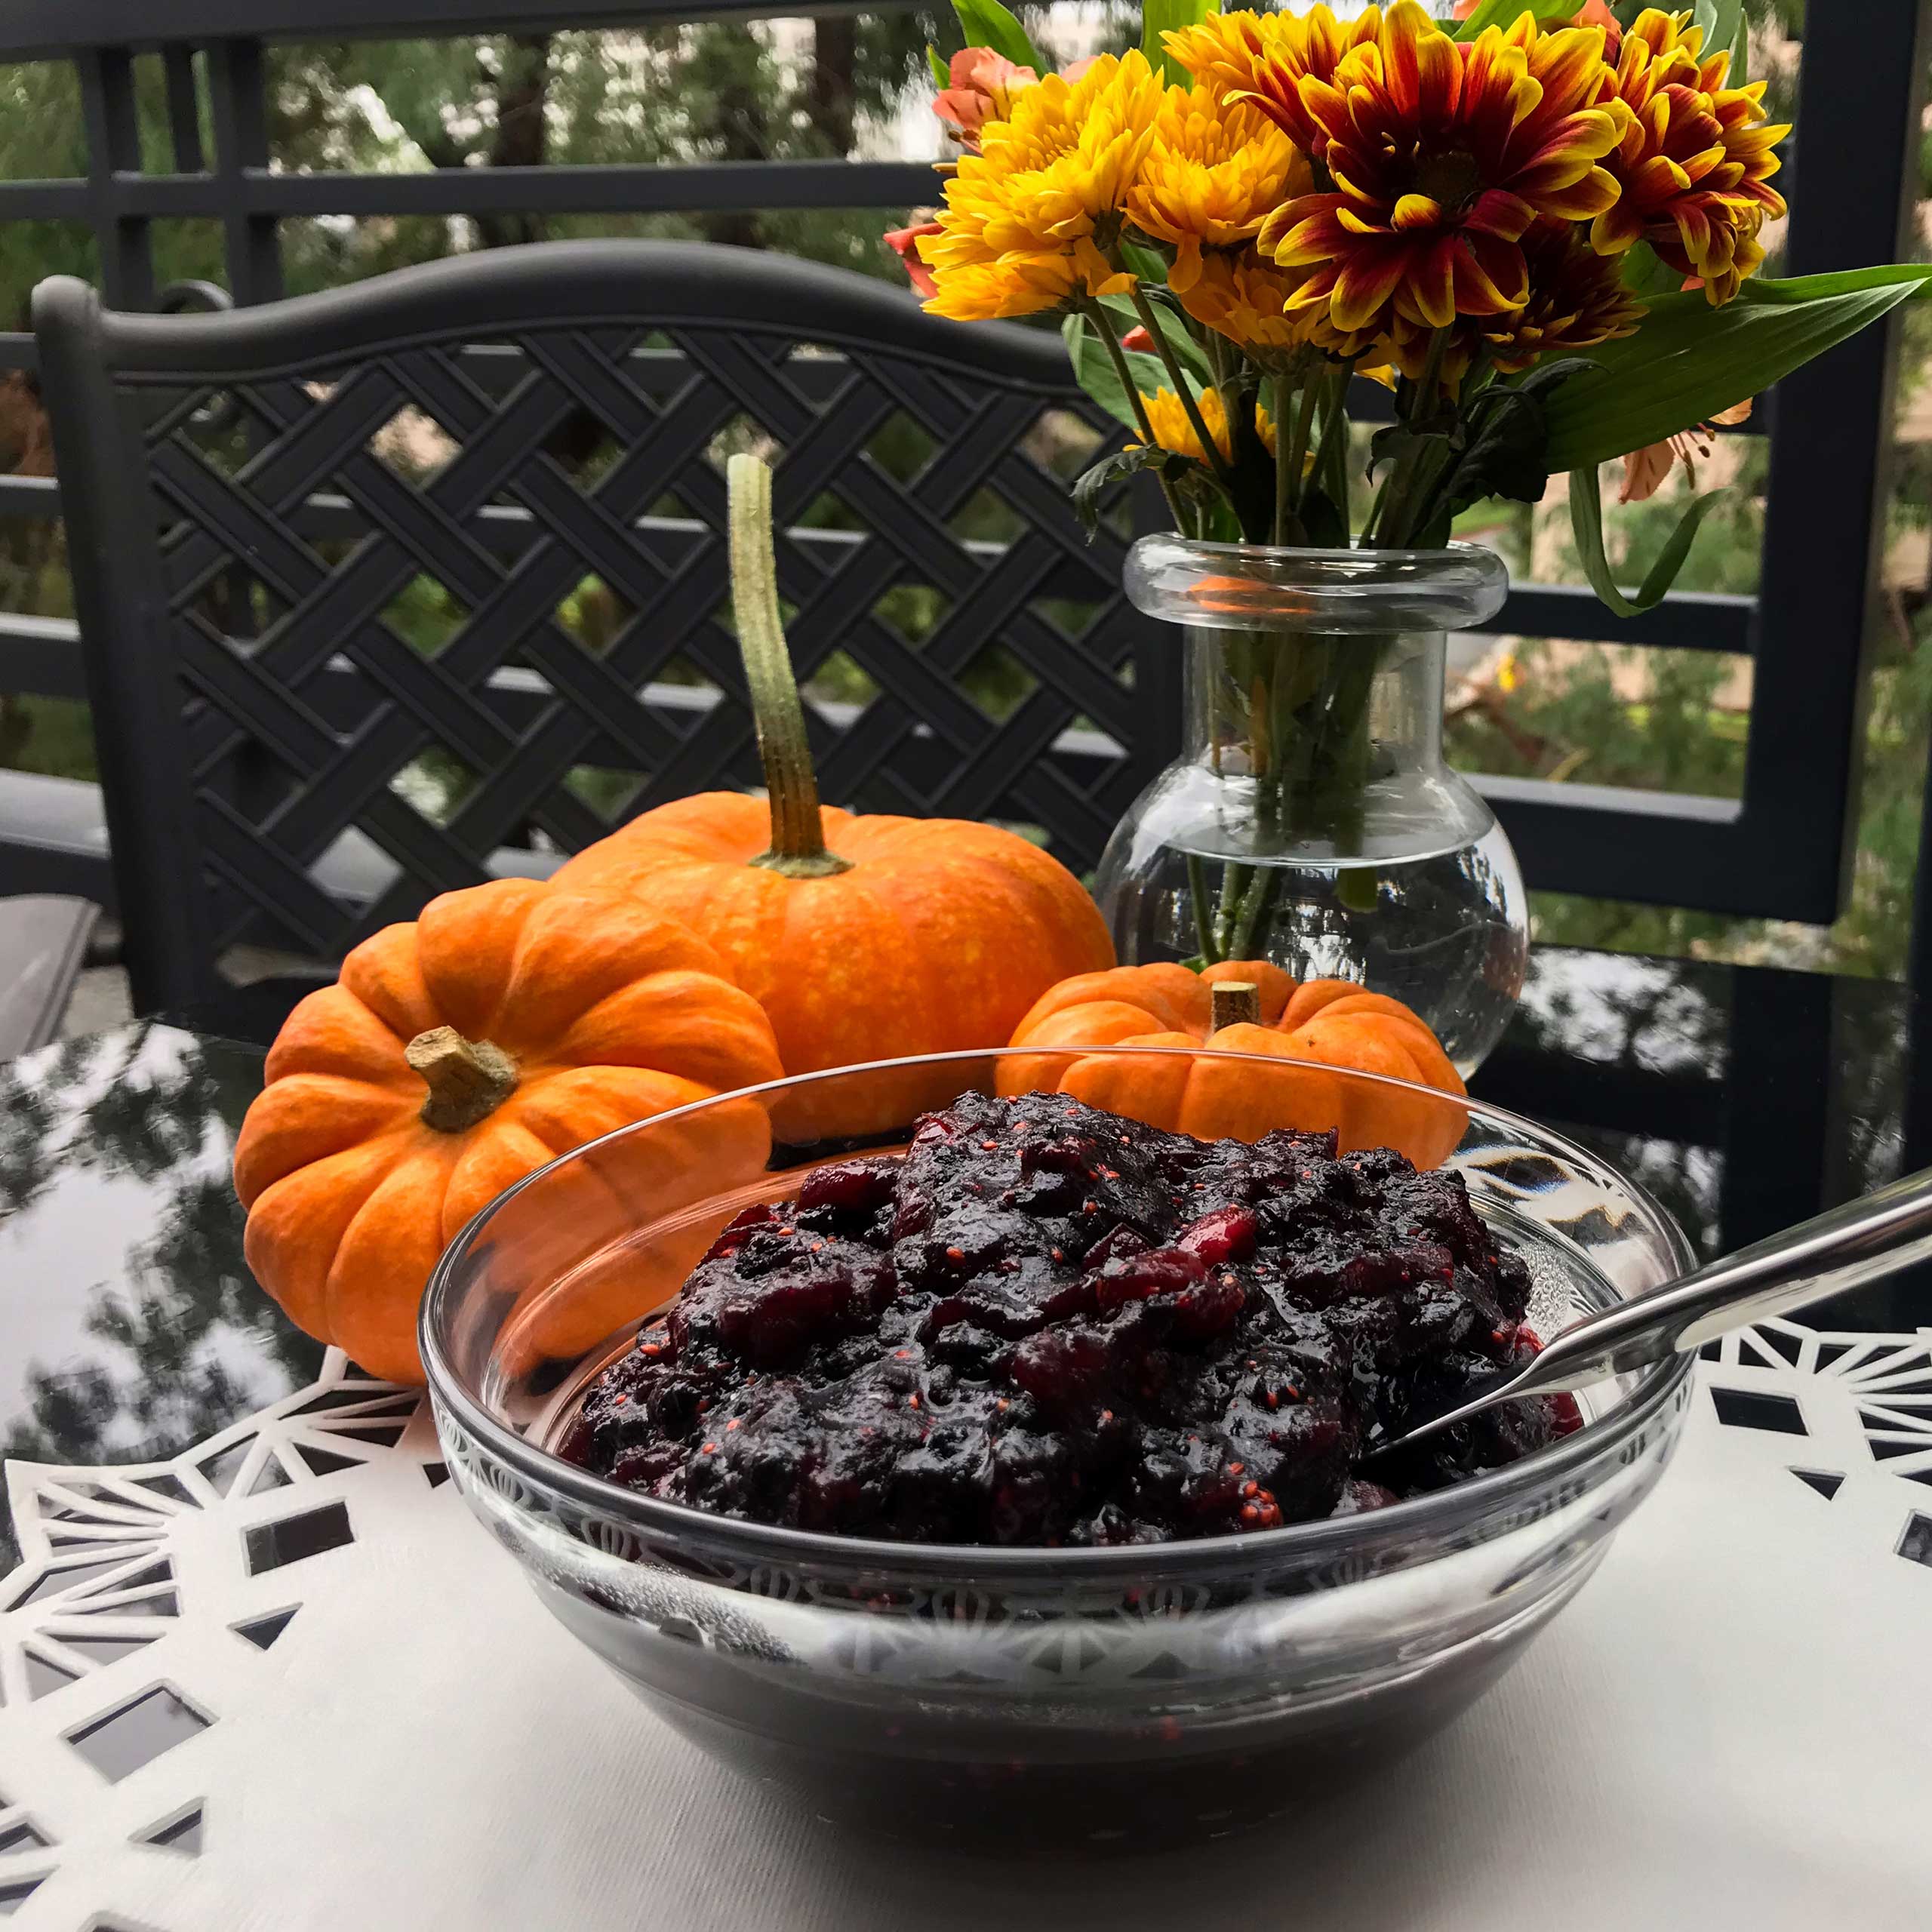 cranberry elderberry sauce in a bowl on the table